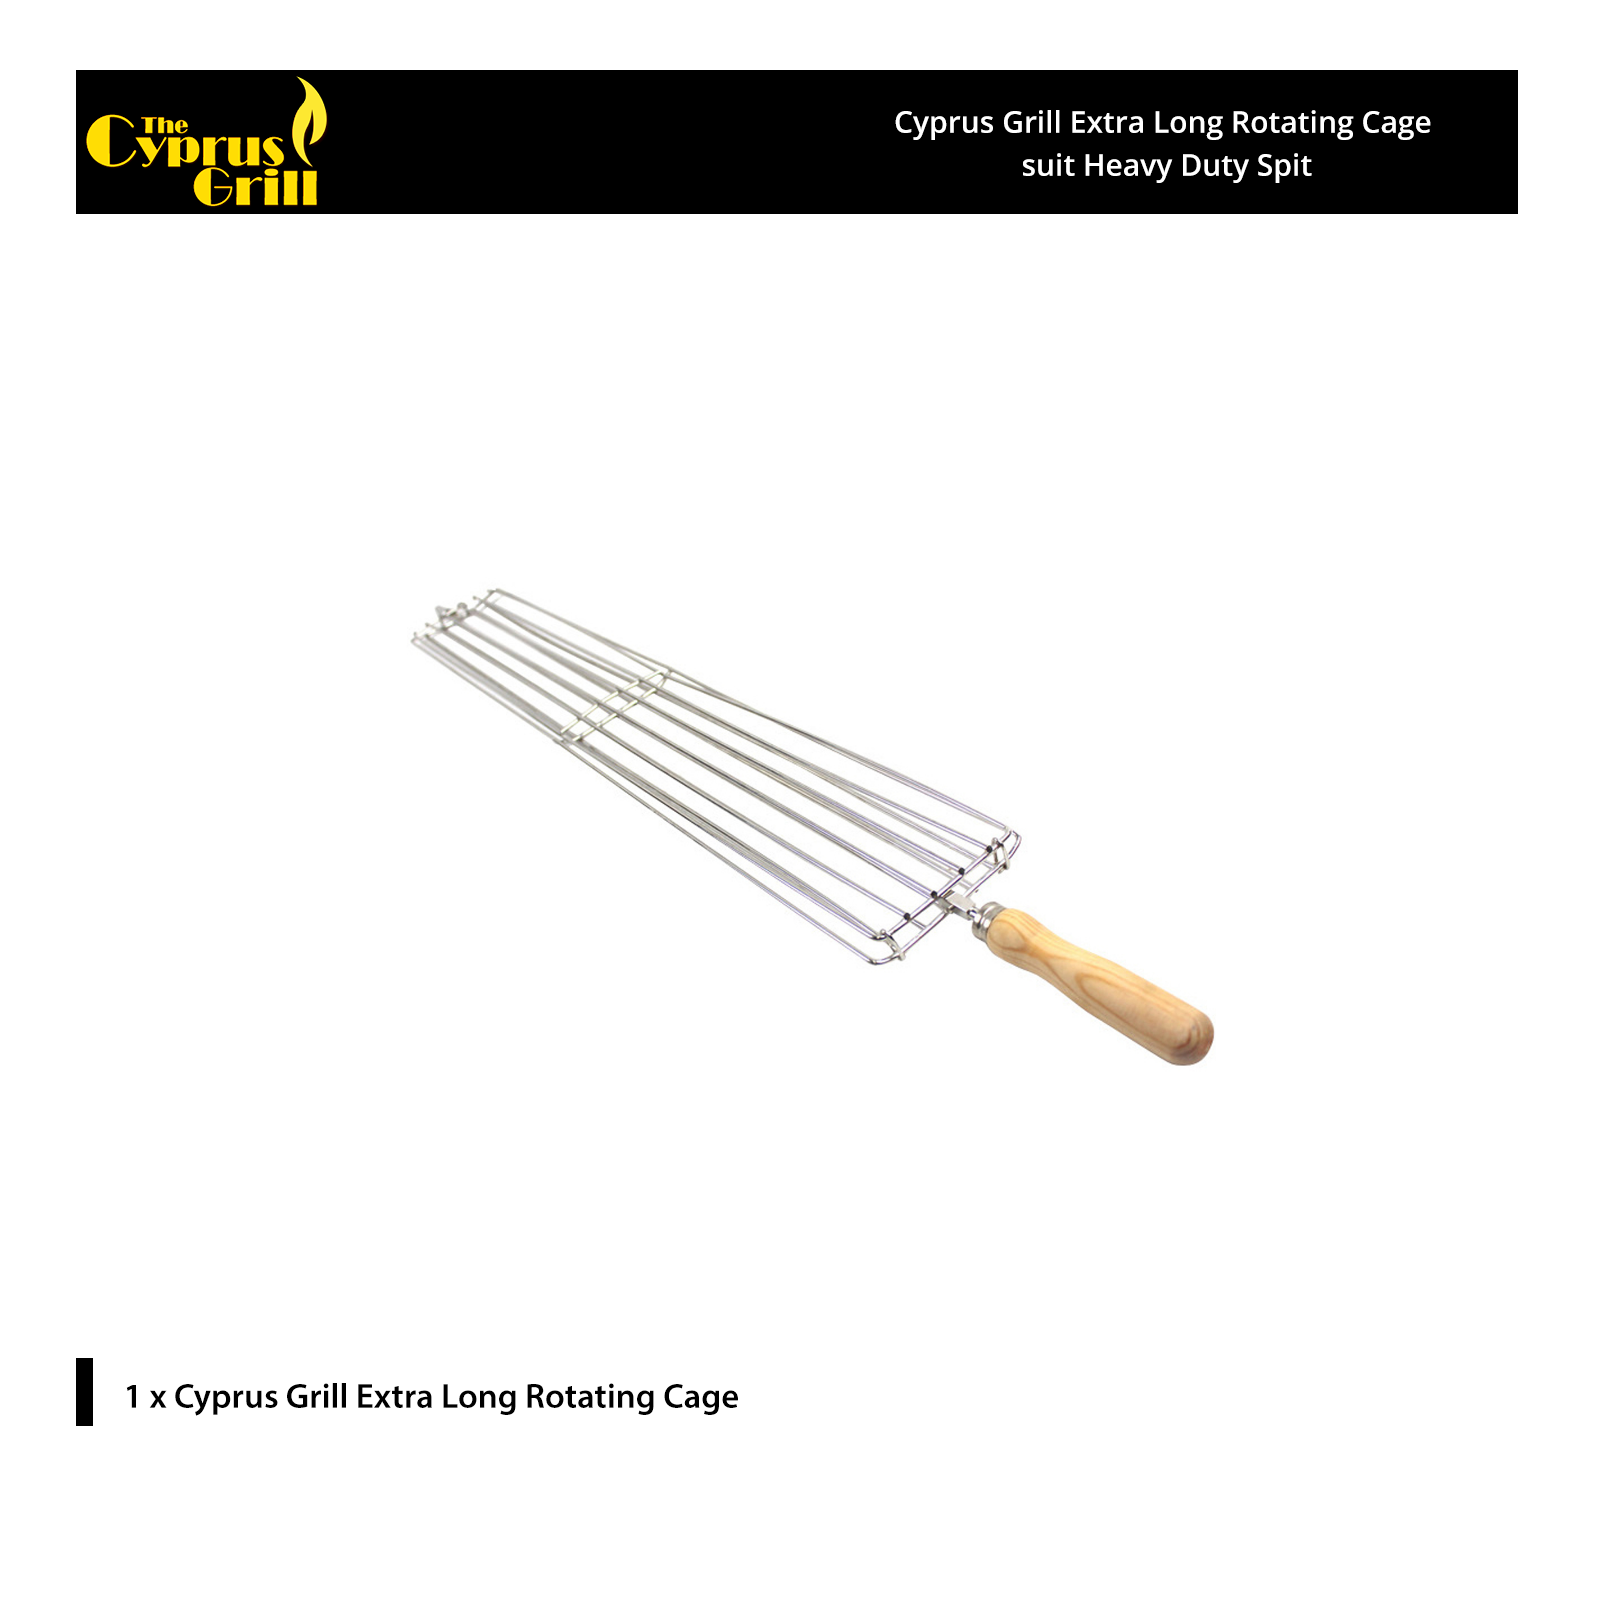 Cyprus Grill Extra Long Rotating Cage suit Heavy Duty Spit - RG-1208HD